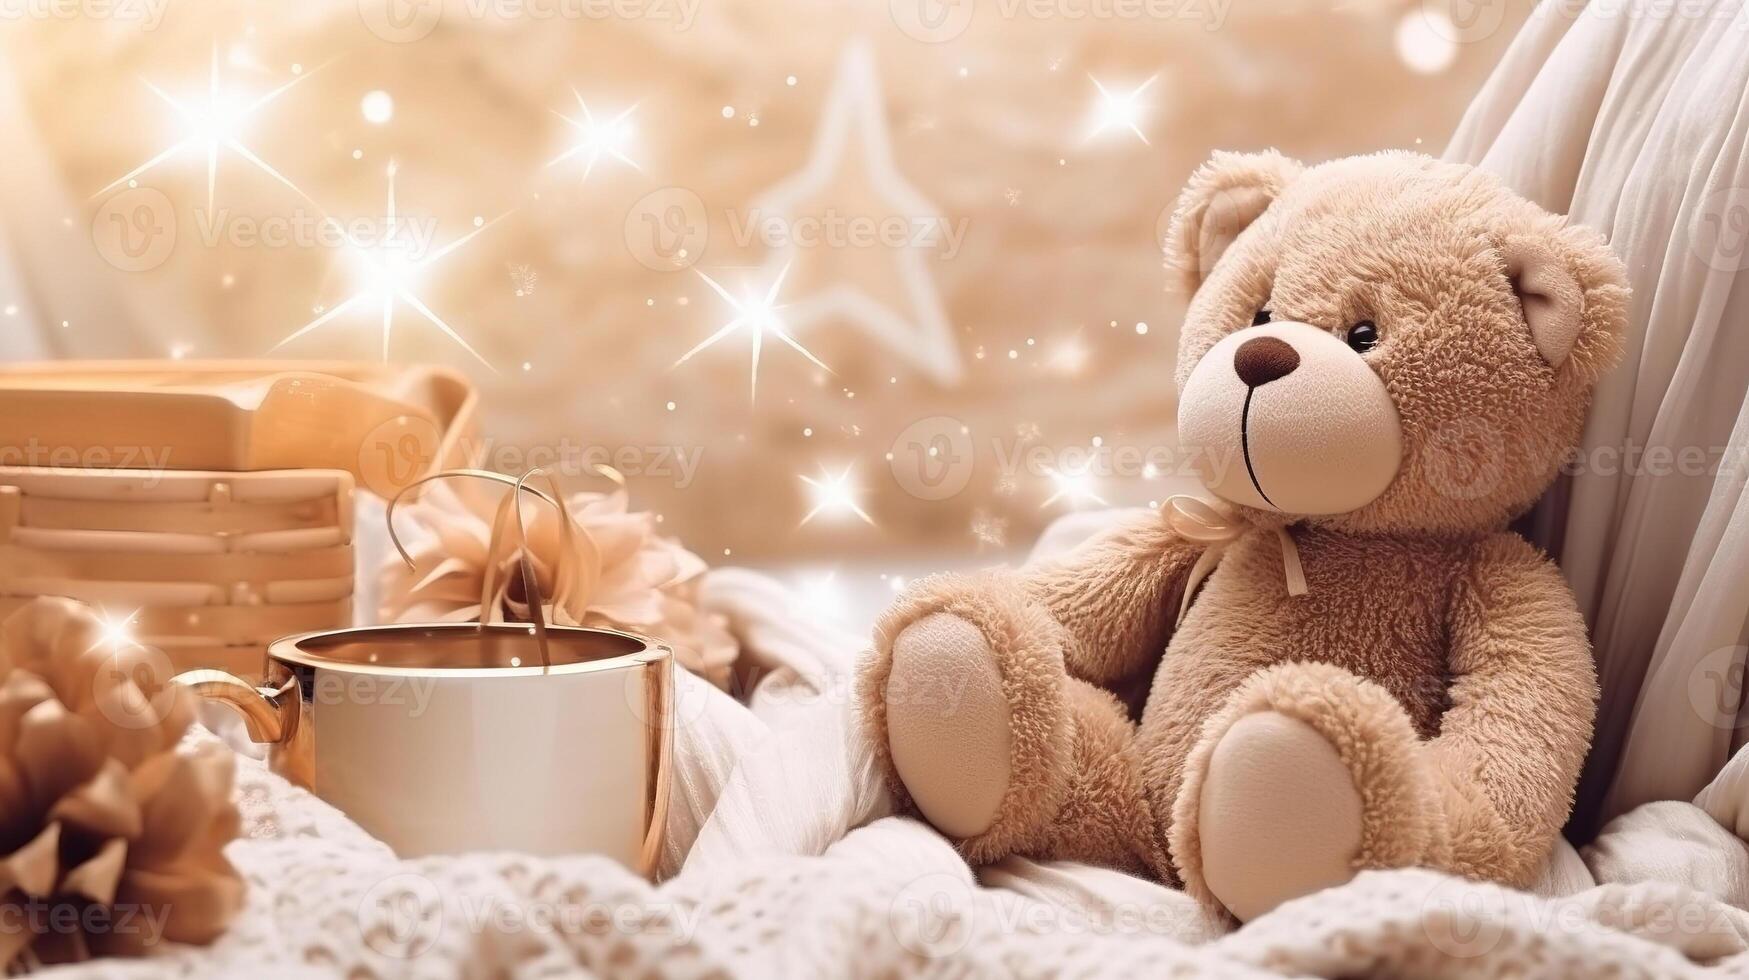 Christmas decor, teddy bear close-up on the background of a cozy interior photo